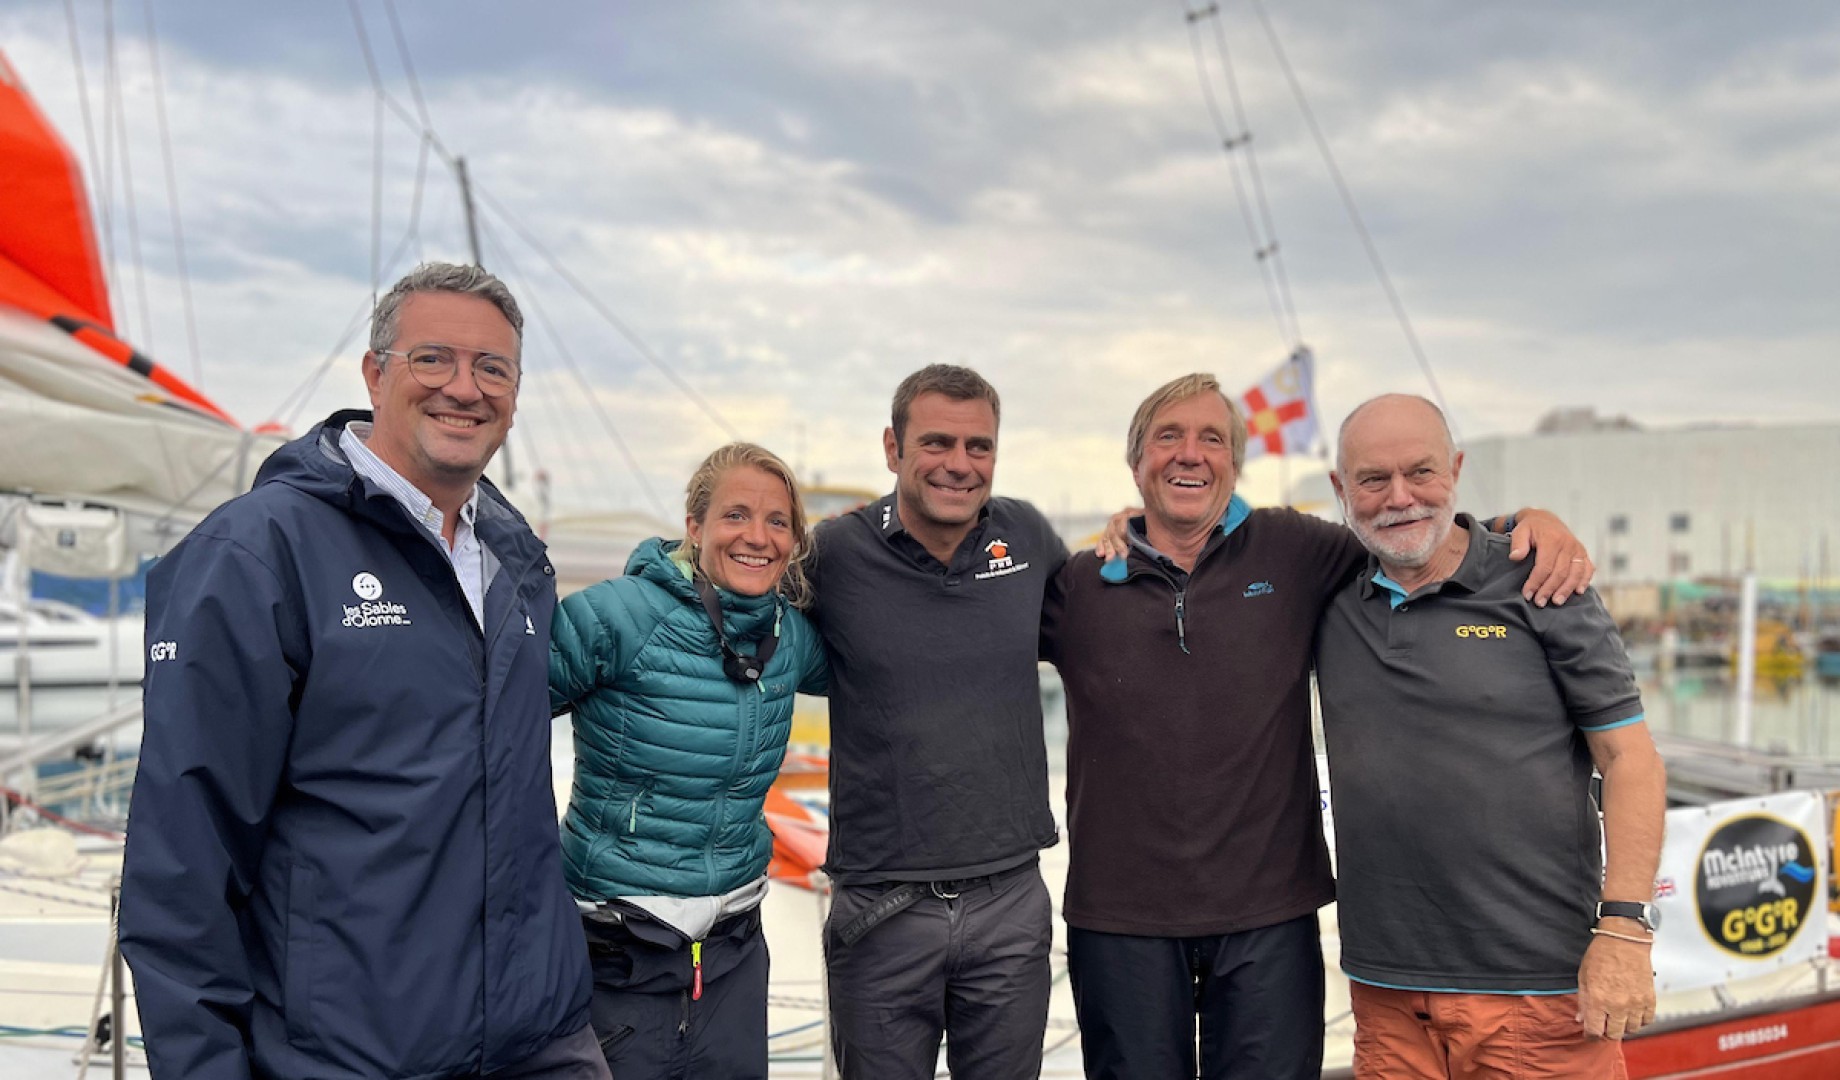 Moreau, mayor of Le Sables D'Olonne (L) and Don McIntyre (R), welcome Curwen, Guillou and Curwen in the early hours of the morning